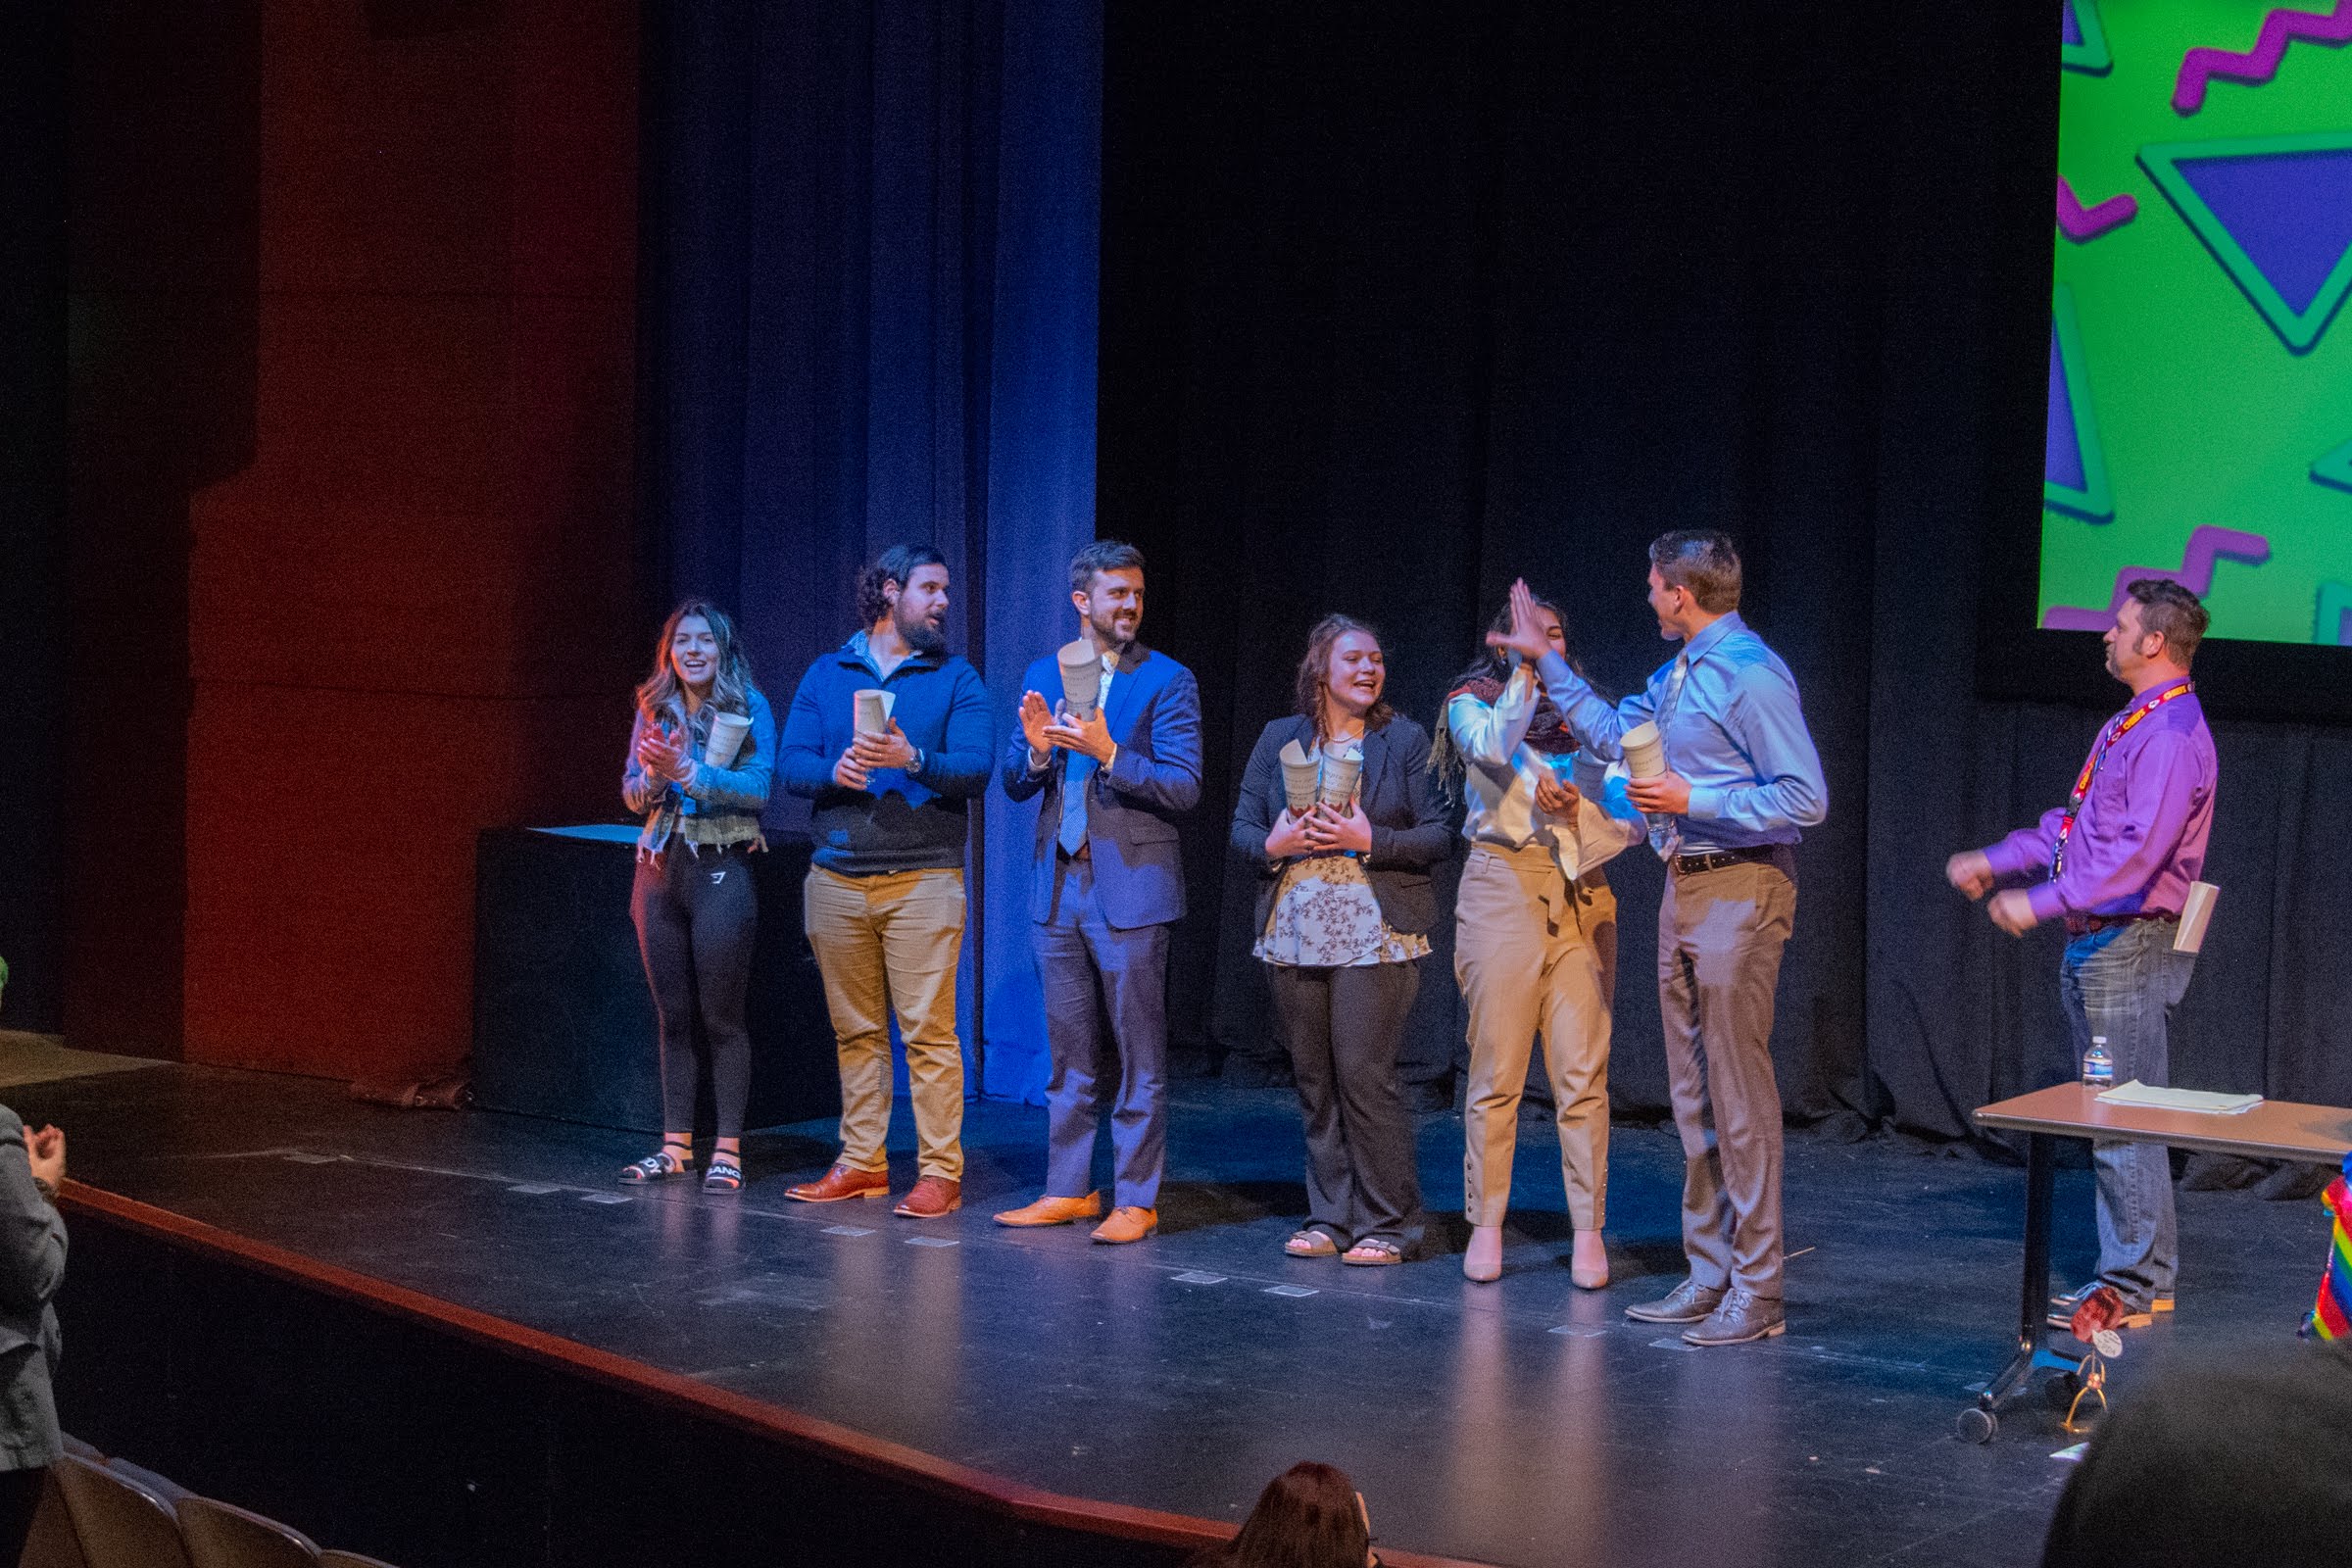 Forensics members standing on stage with a host high-fiving a participant.